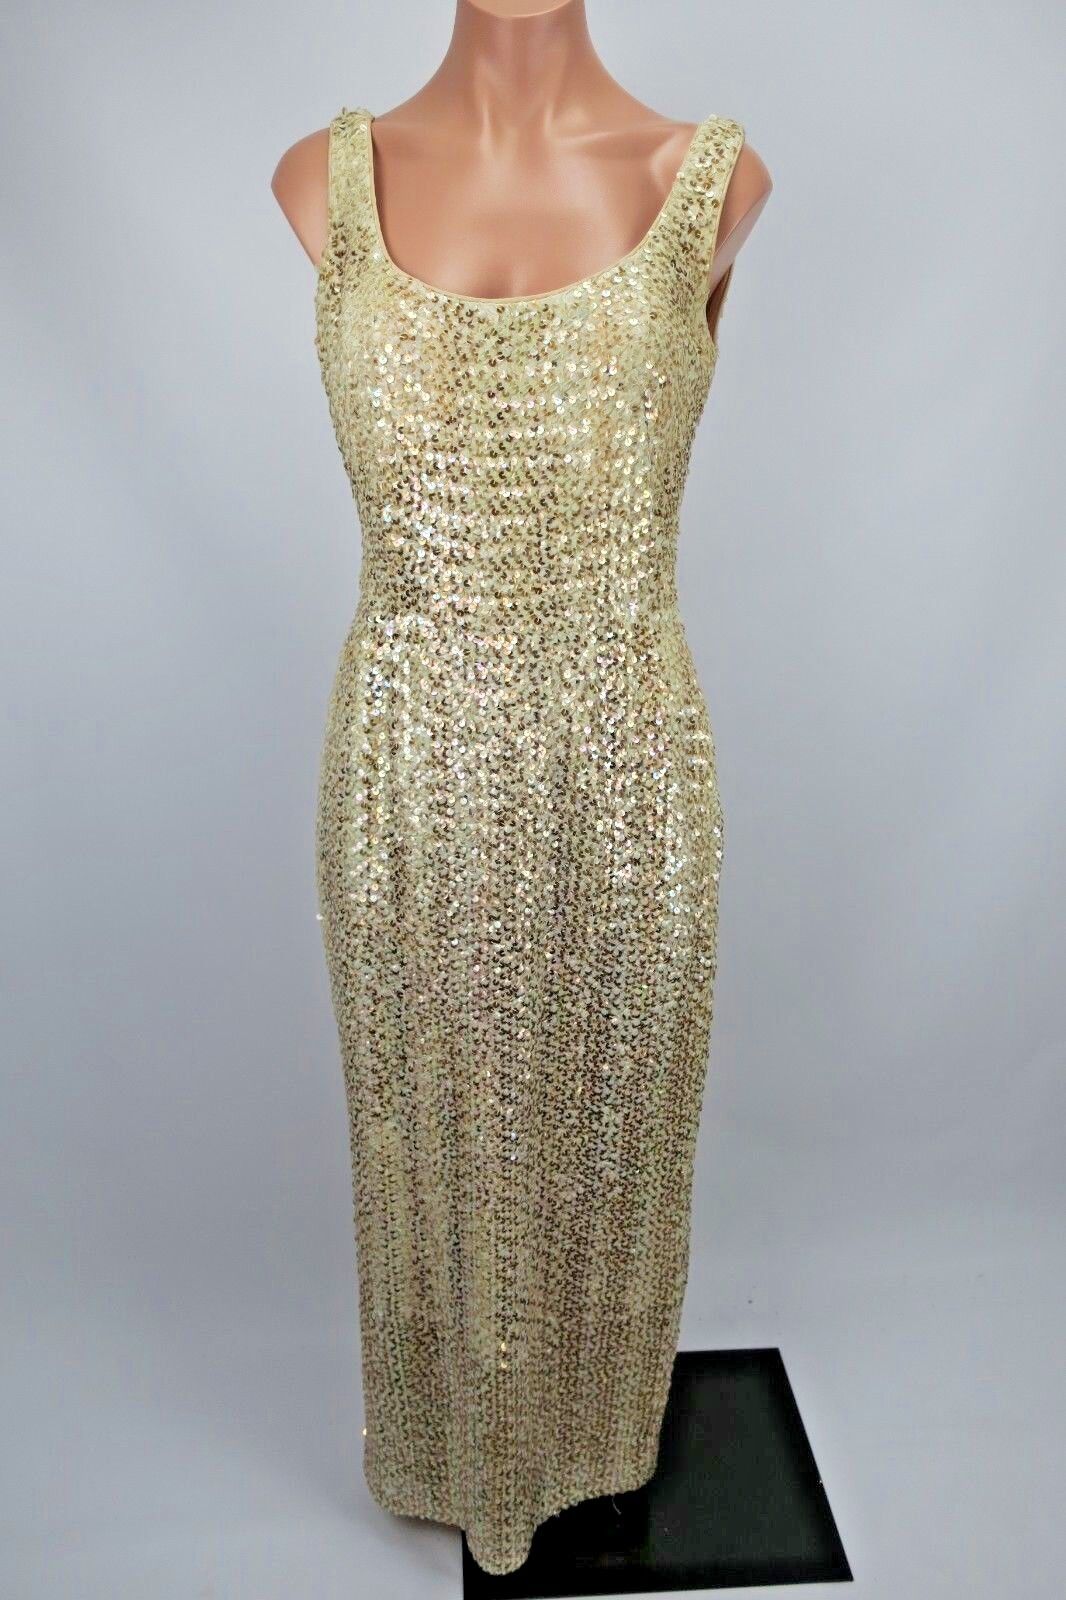 VTG 60s 70s Sequin GOLD Hollywood Glam Open Back Dress Evening Party Gatsby S/M